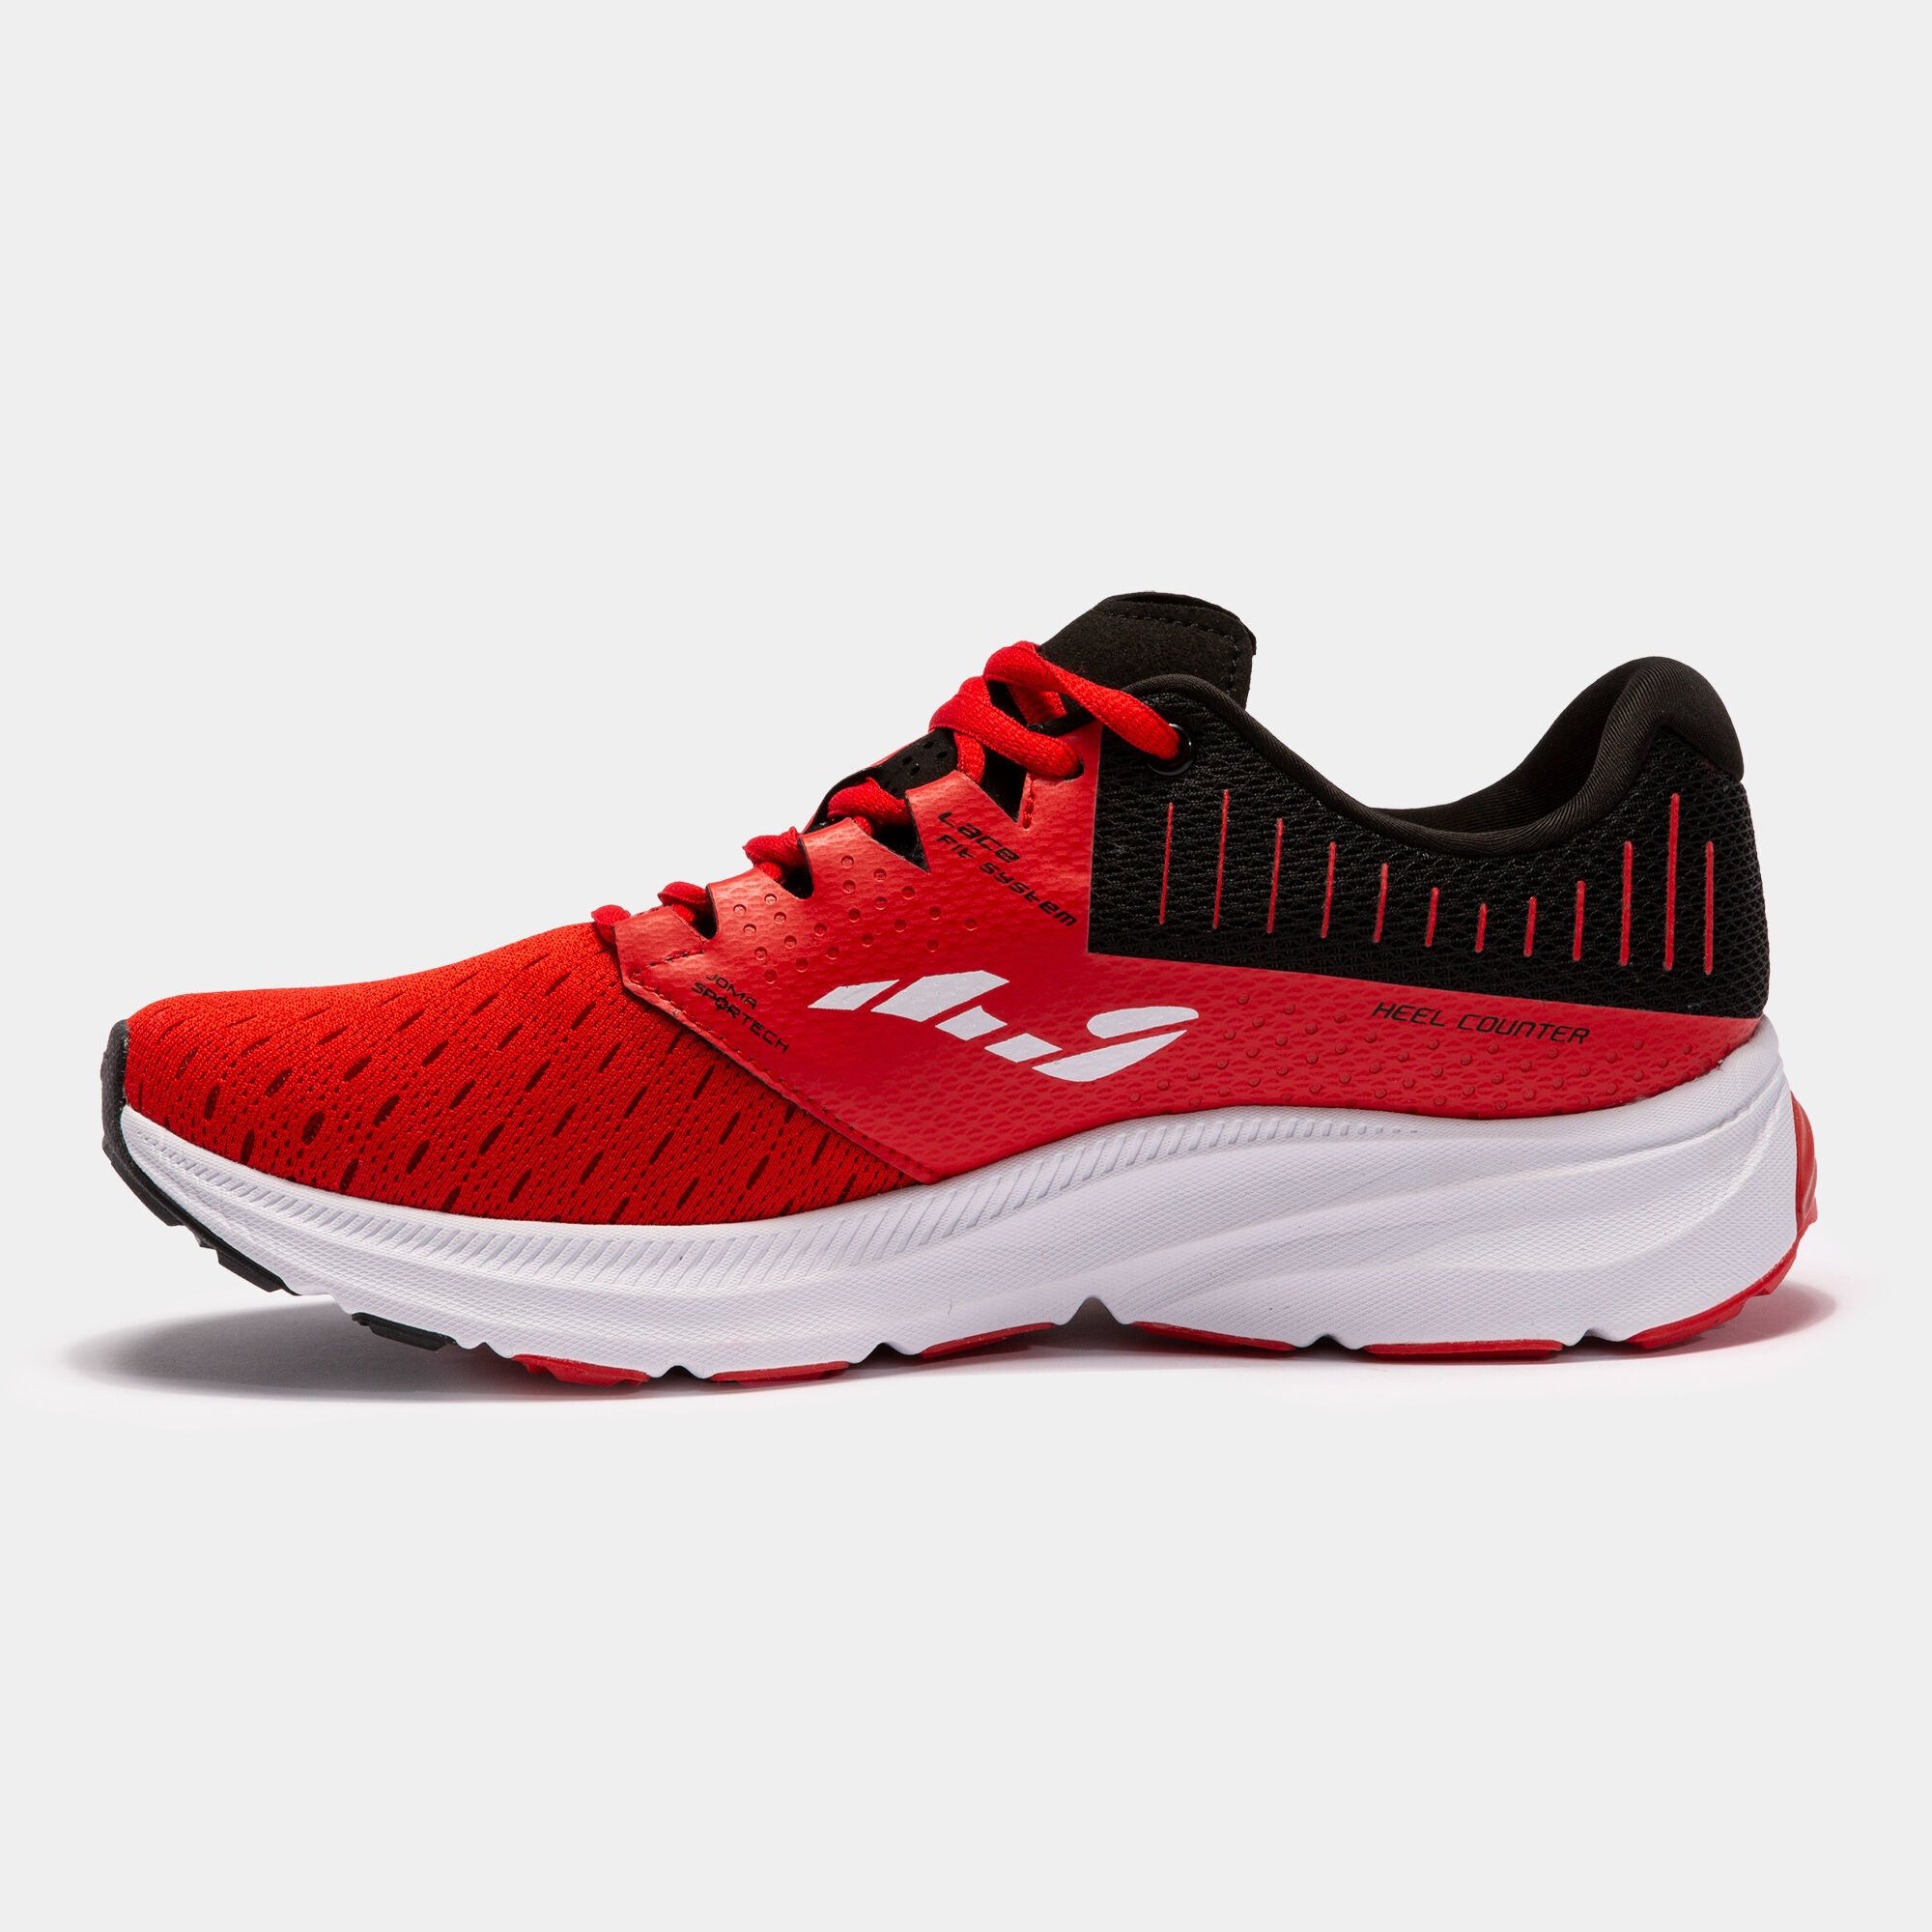 CHAUSSURES RUNNING VICTORY 22 HOMME ROUGE NOIR